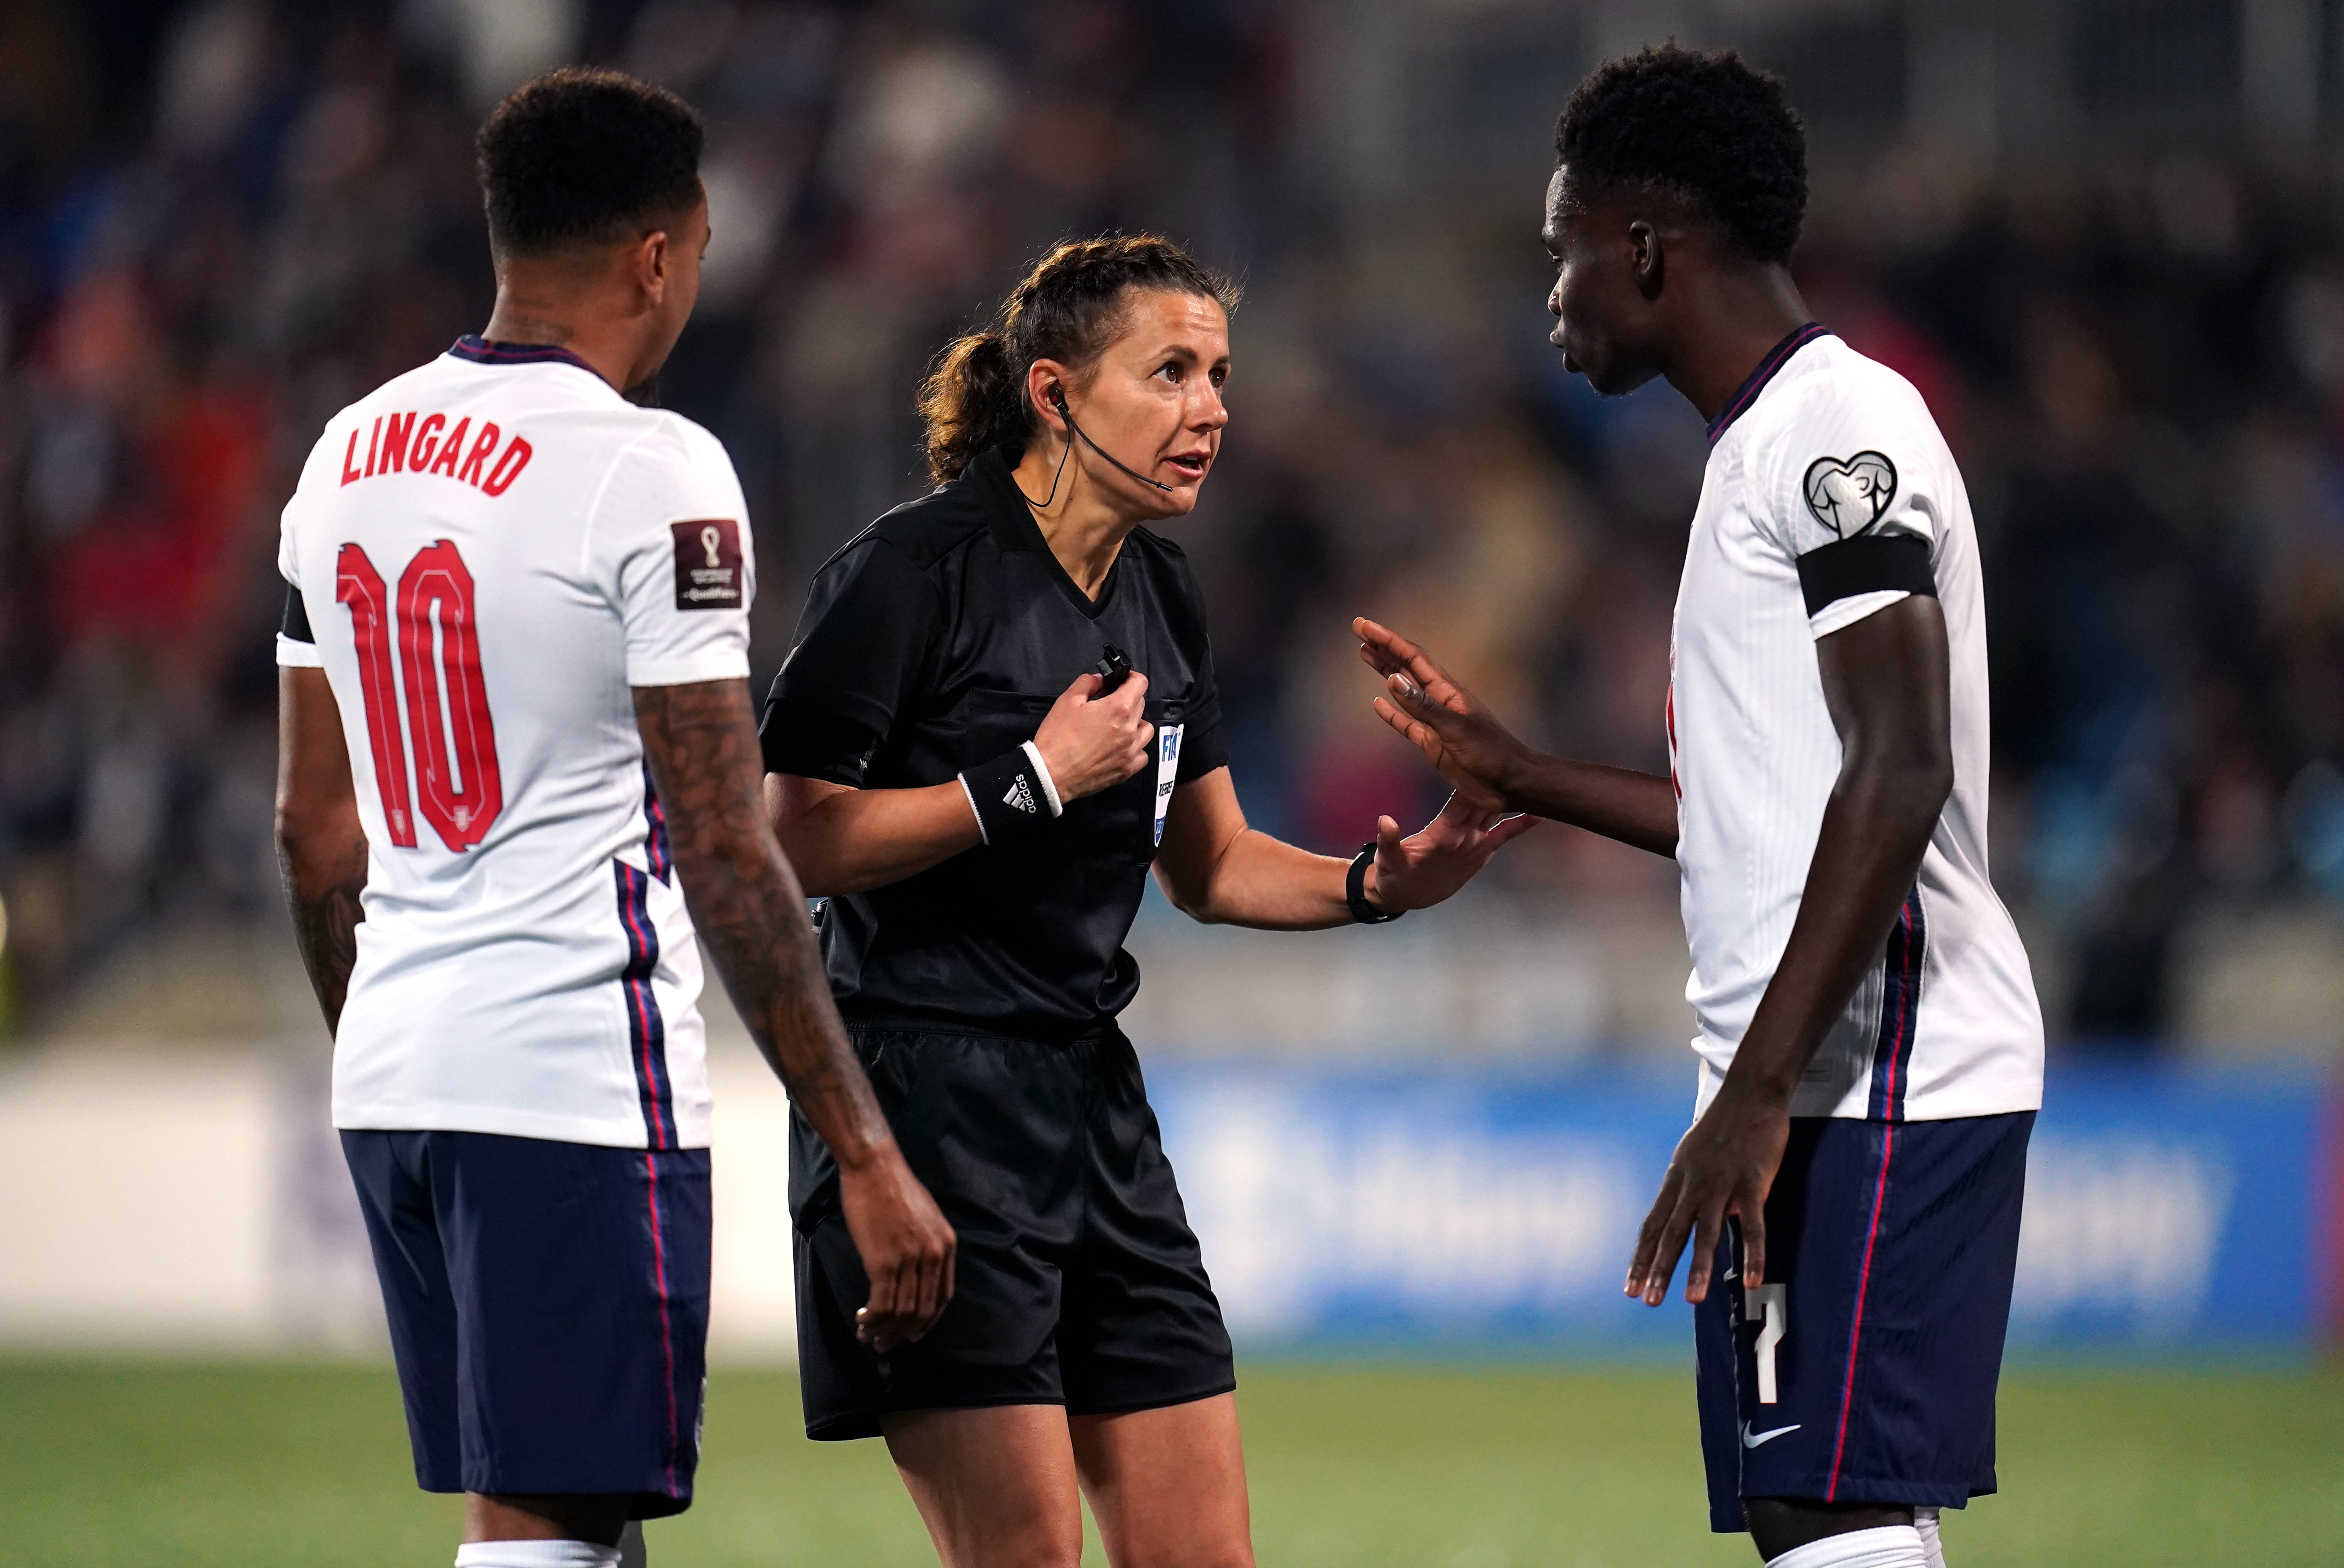 Kateryna Monzul became the first woman to referee an England fixture after officiating their World Cup qualifying win over Andorra. (Nick Potts/PA)